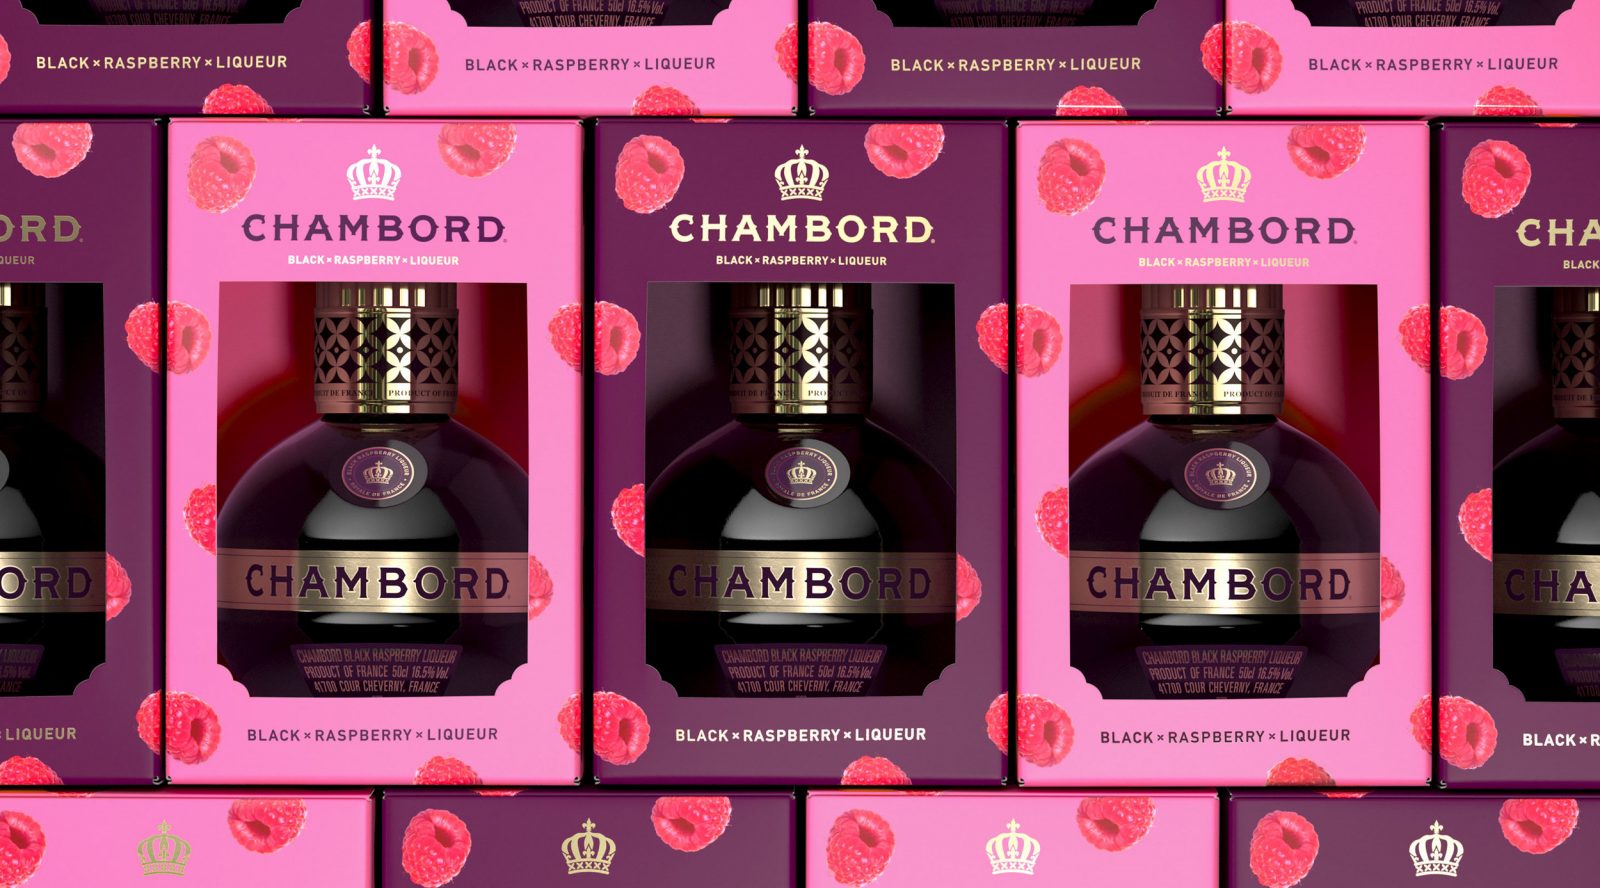 Limited Edition and Gifting for Chambord Luxurious Liqueur